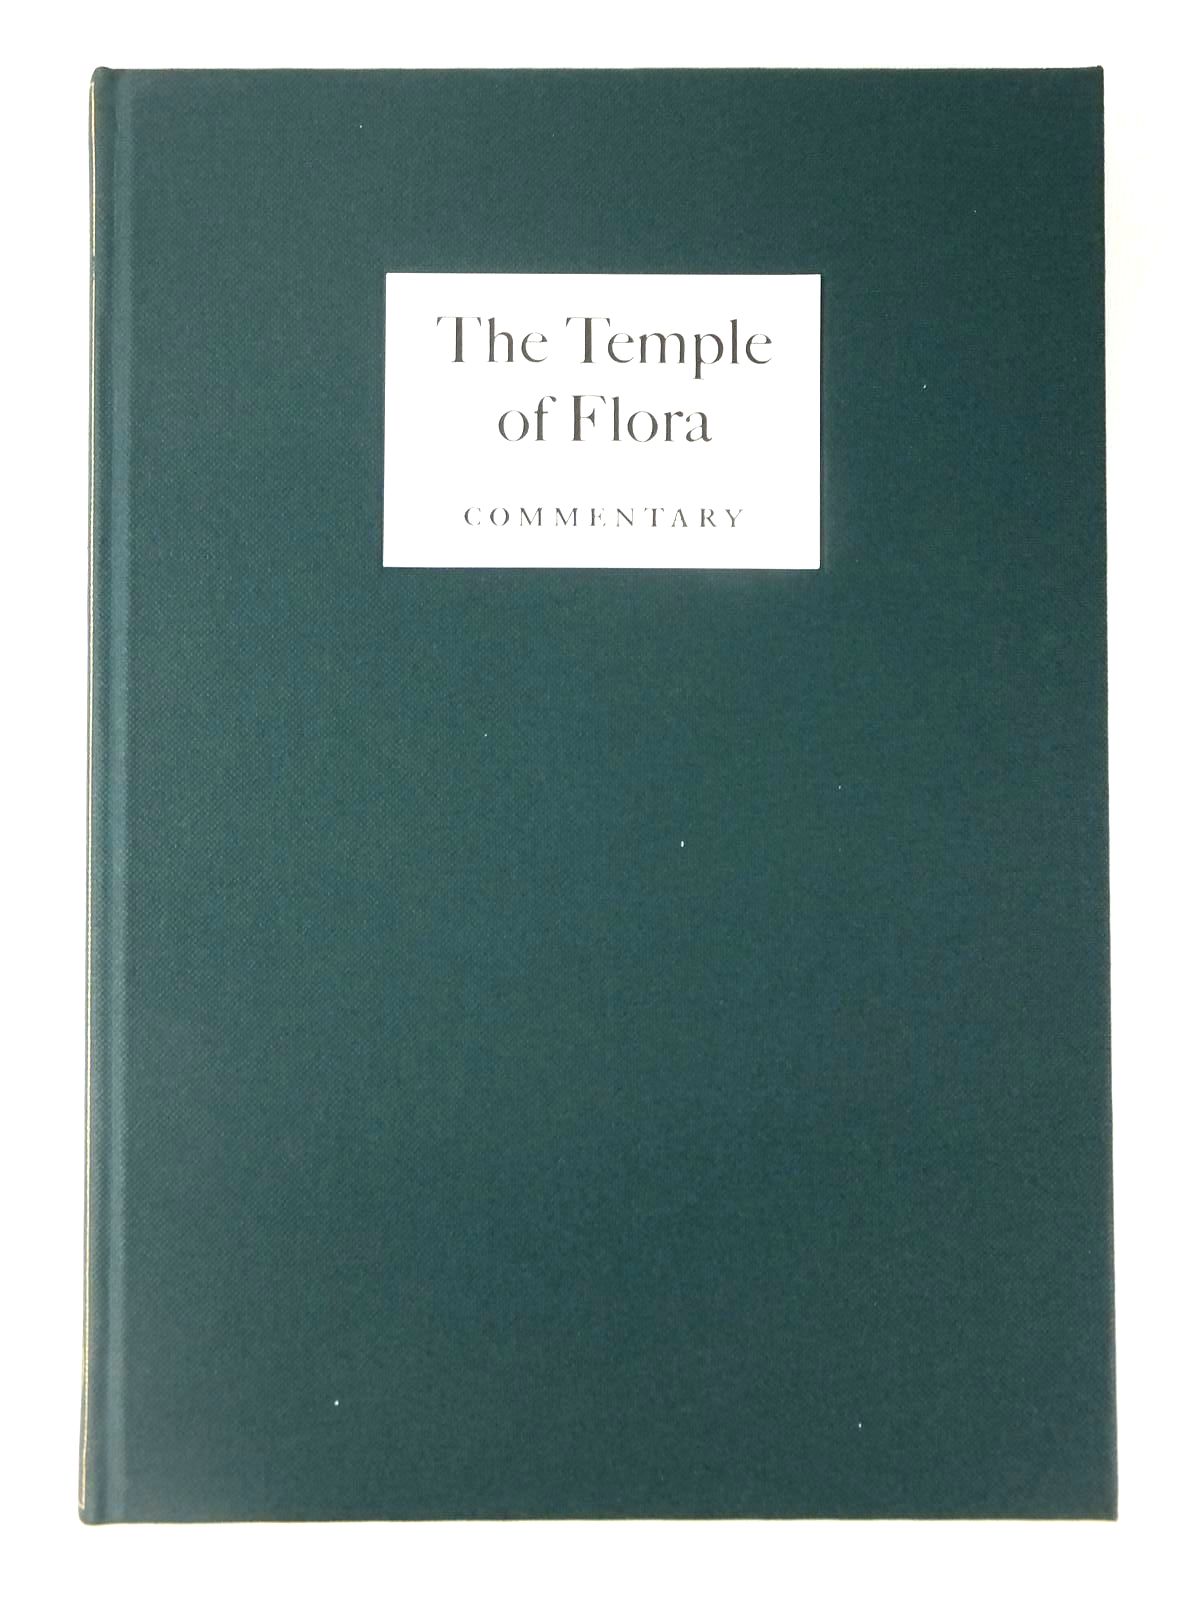 Photo of THE TEMPLE OF FLORA written by Harris, Stephen illustrated by Thornton, Robert published by Folio Society (STOCK CODE: 1812676)  for sale by Stella & Rose's Books